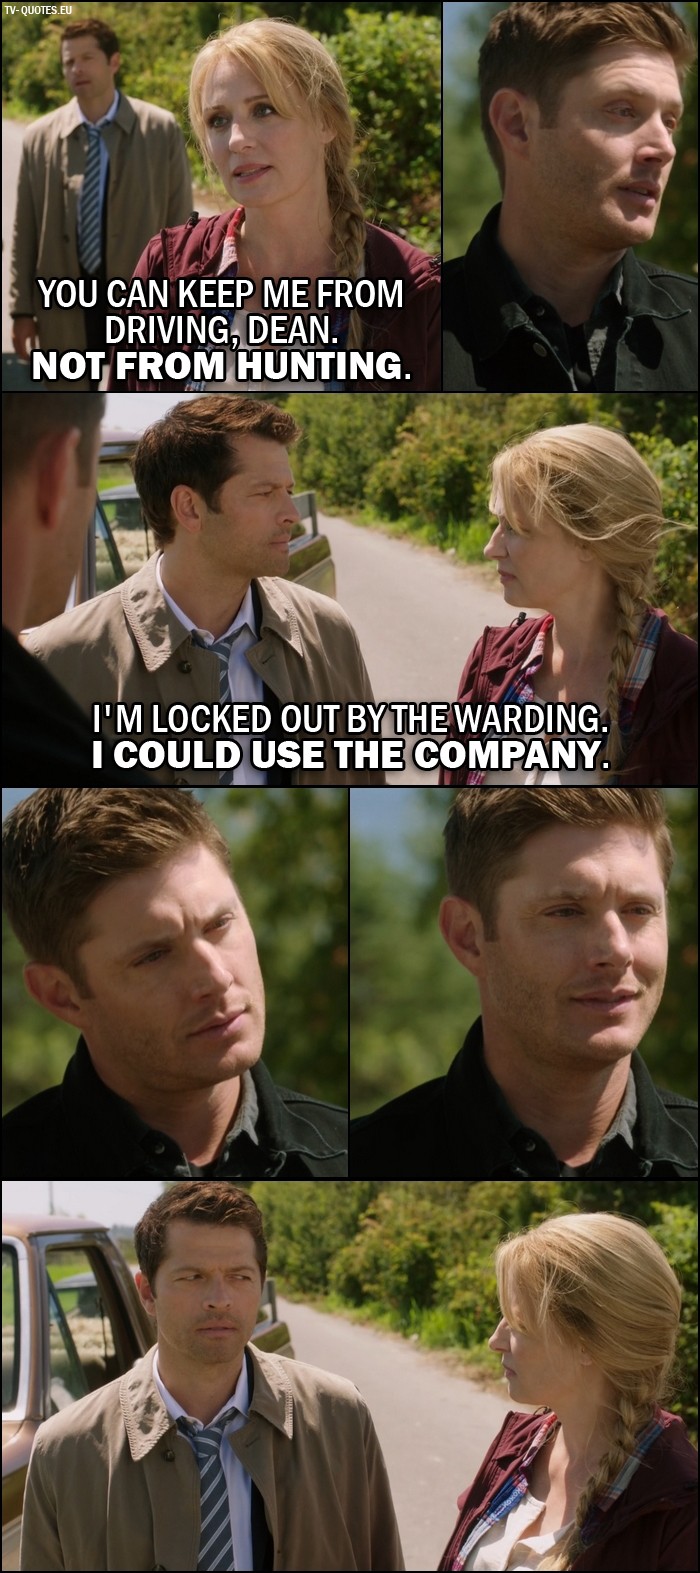 Supernatural quote from 12x02 - Mary Winchester: You can keep me from driving, Dean. Not from hunting. Castiel: I'm locked out by the warding. I could use the company.